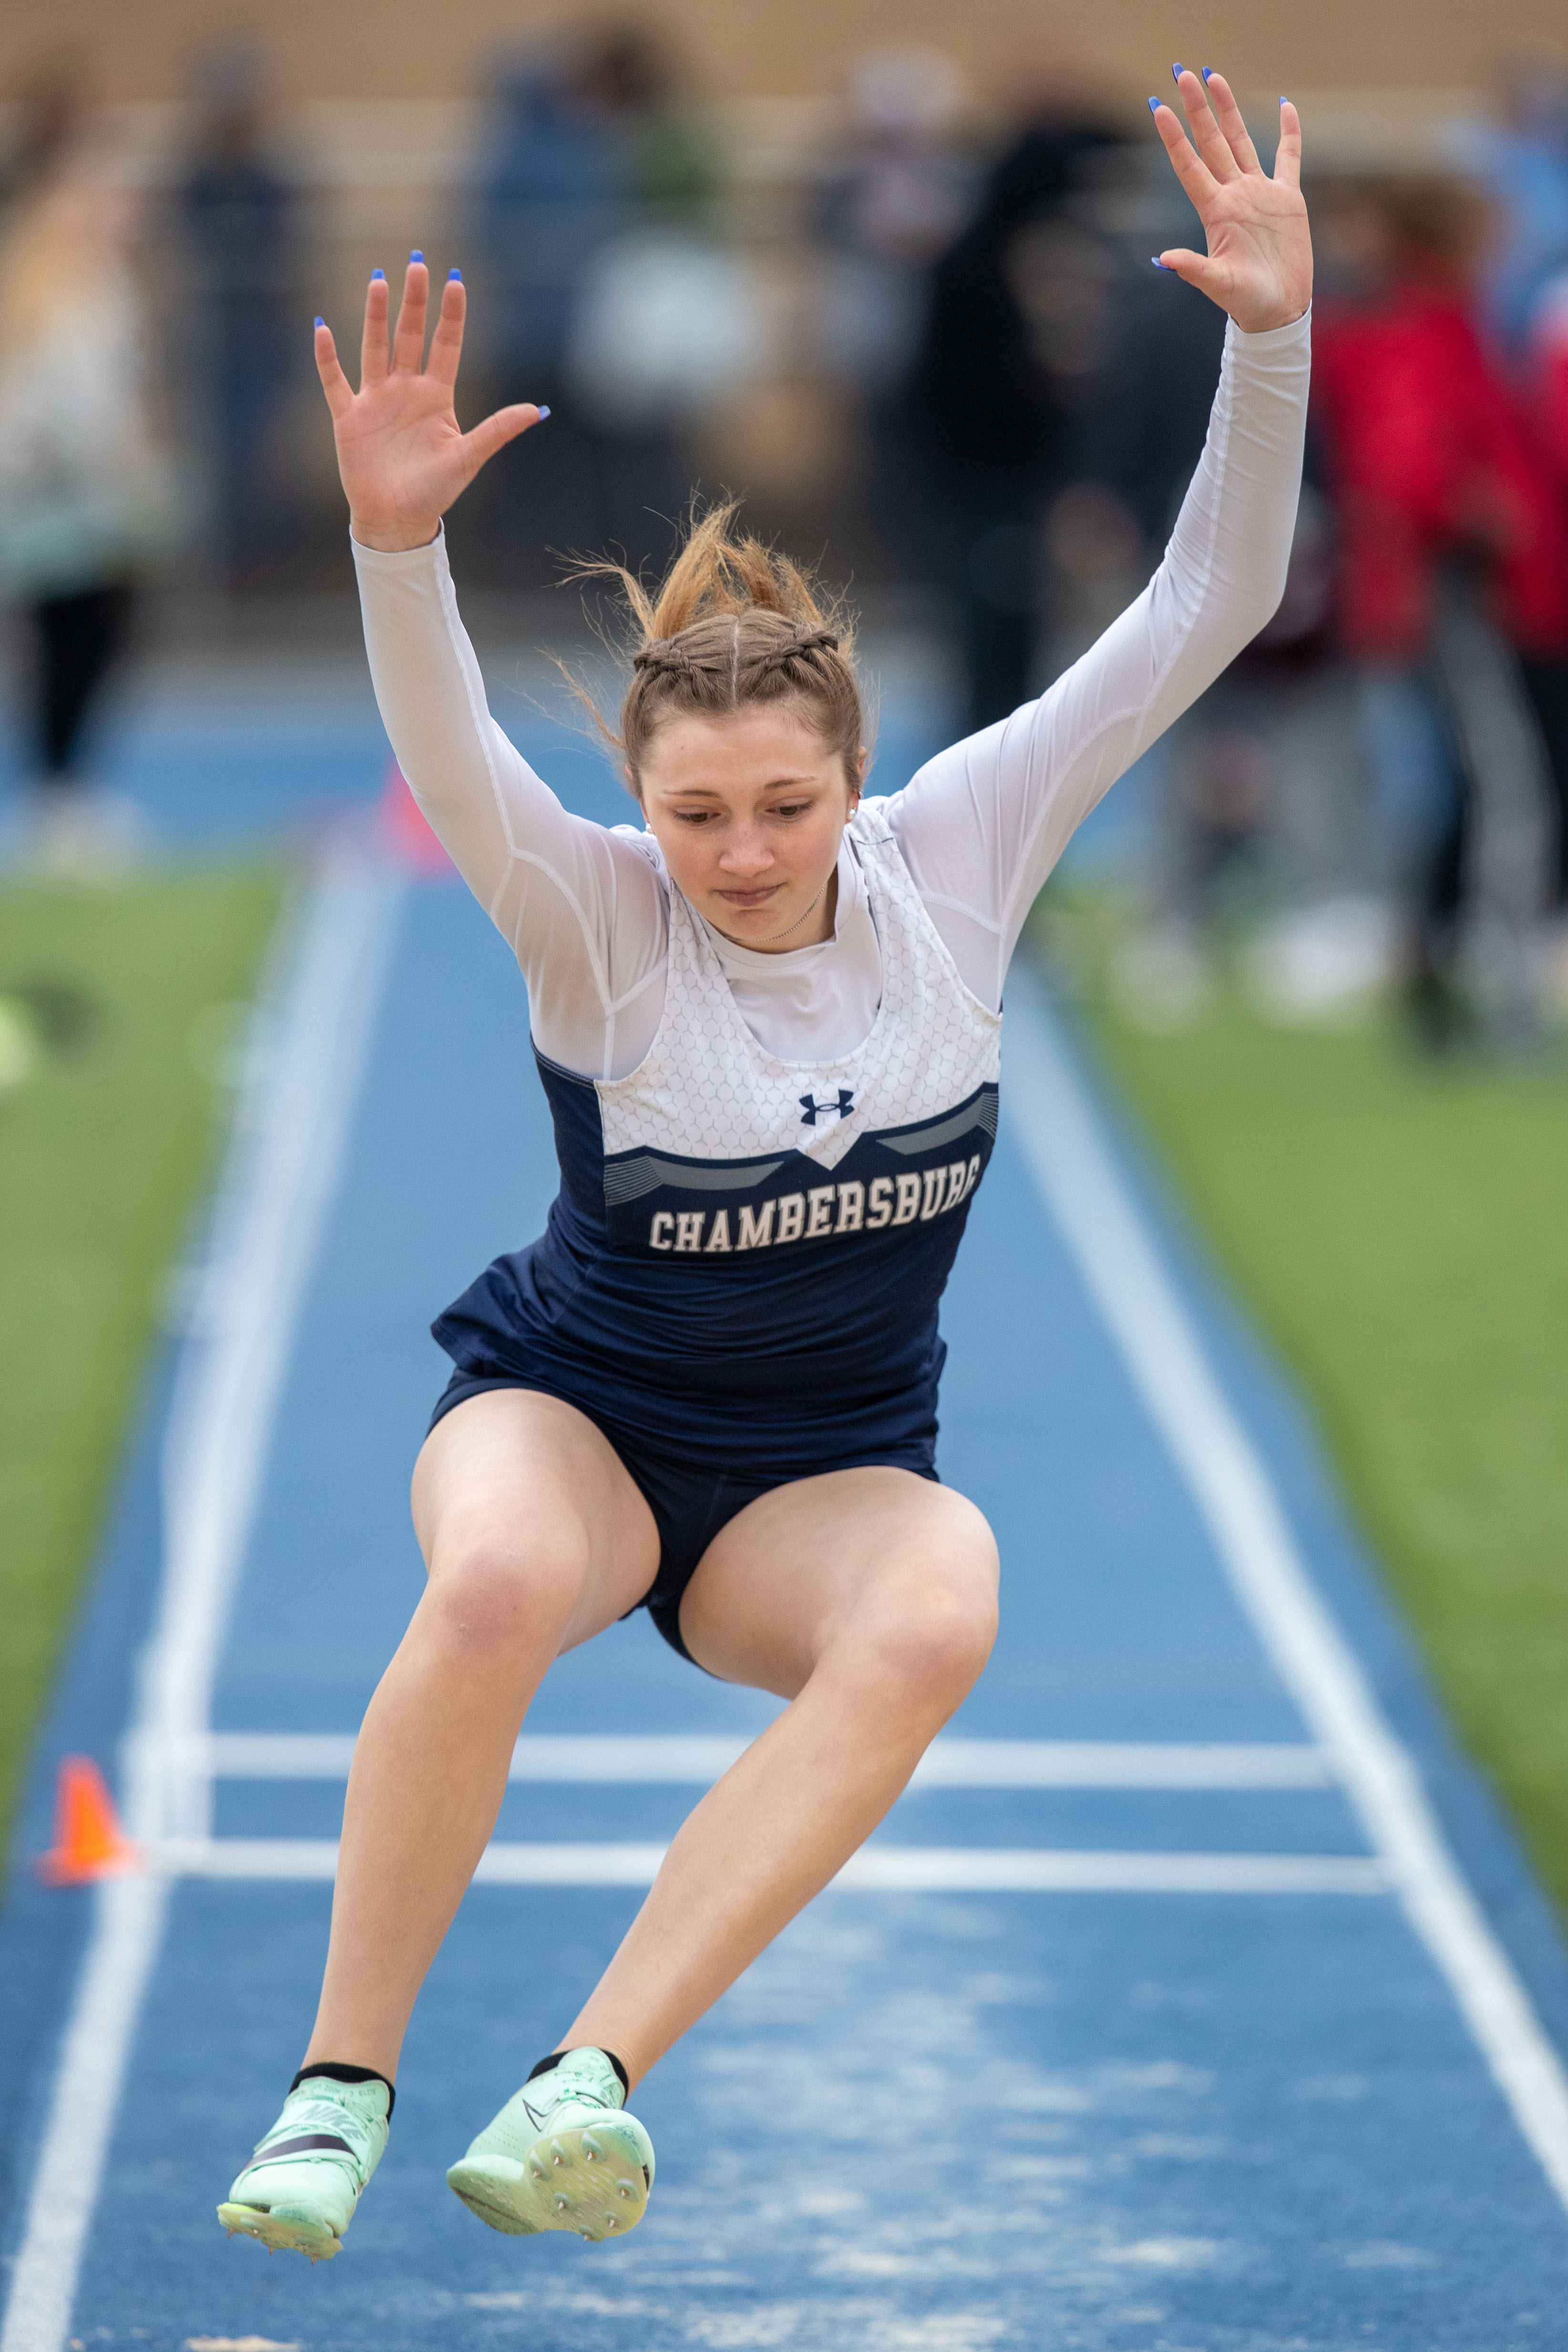 Chambersburg’s Kate Etter triple jumps at the 2023 Tim Cook Memorial Invitational track & field meet at Chambersburg, Pa., Mar. 25, 2023. She finished second with a jump of 33-4.75.Mark Pynes | pennlive.com